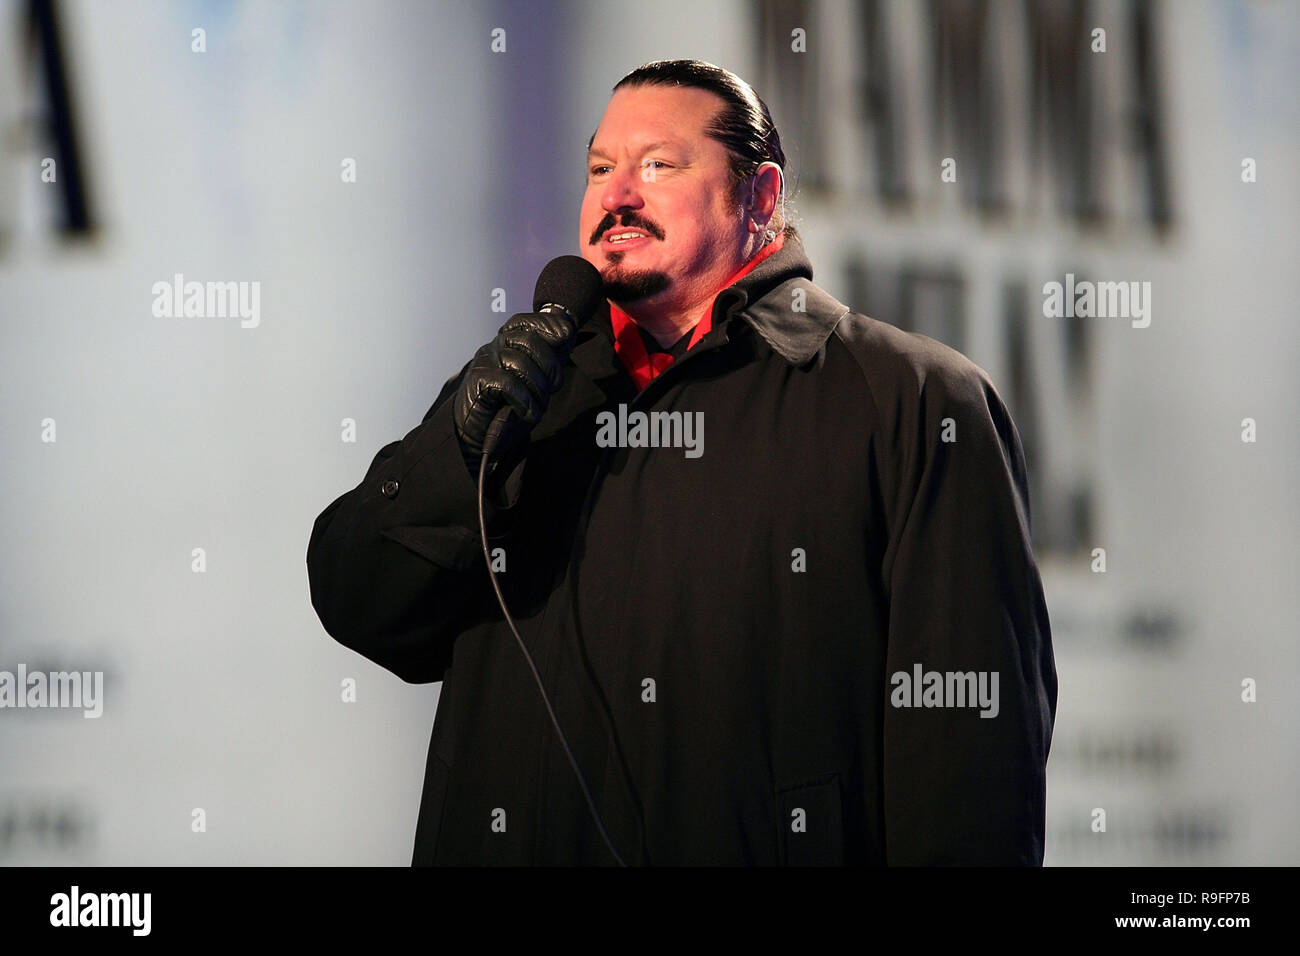 NEW YORK - DECEMBER 31:  Announcer at the ceremony to lower the New Years Eve ball in Times Square on December 31, 2008 in New York City.  (Photo by Steve Mack/S.D. Mack Pictures) Stock Photo